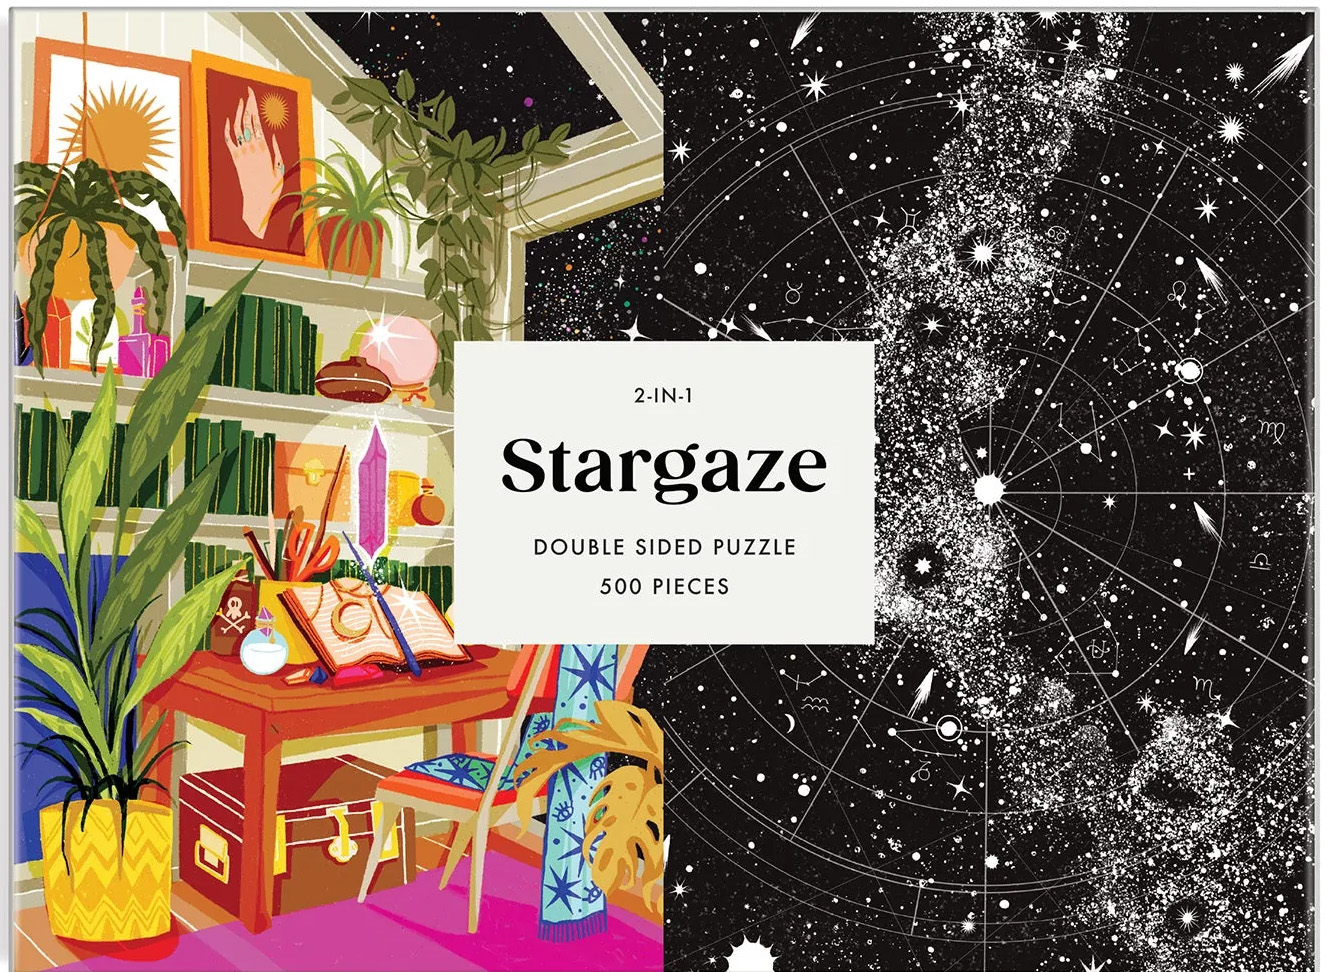 Stargaze Double Sided Puzzle Around the House Jigsaw Puzzle